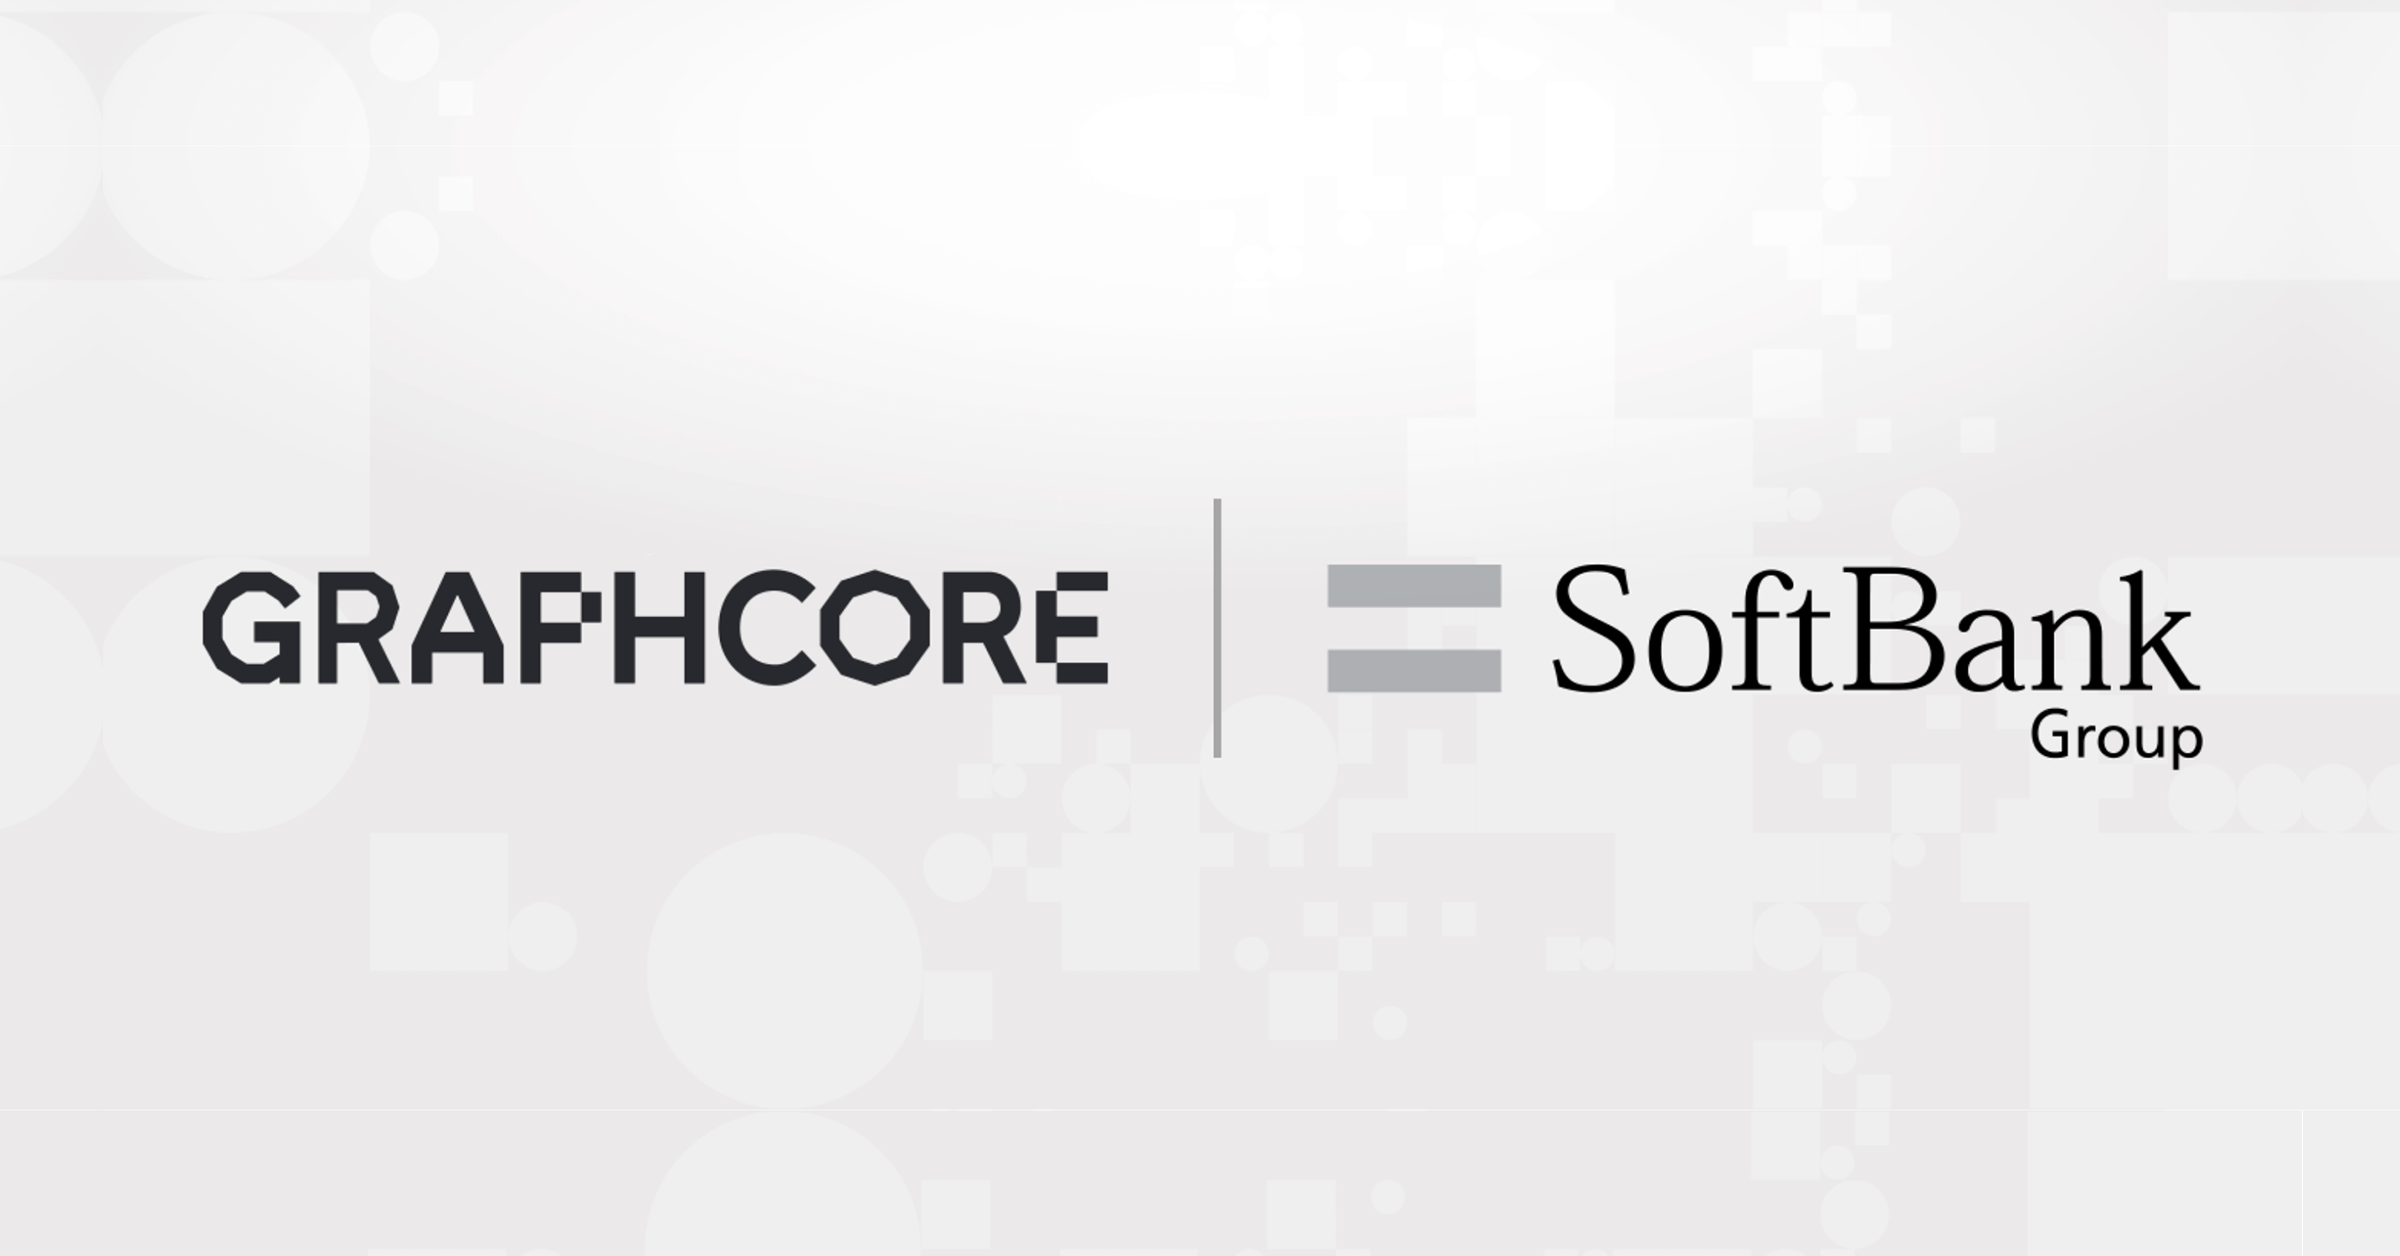 G‍raphcore Joins Softbank Group to Build Next Generation of AI Compute